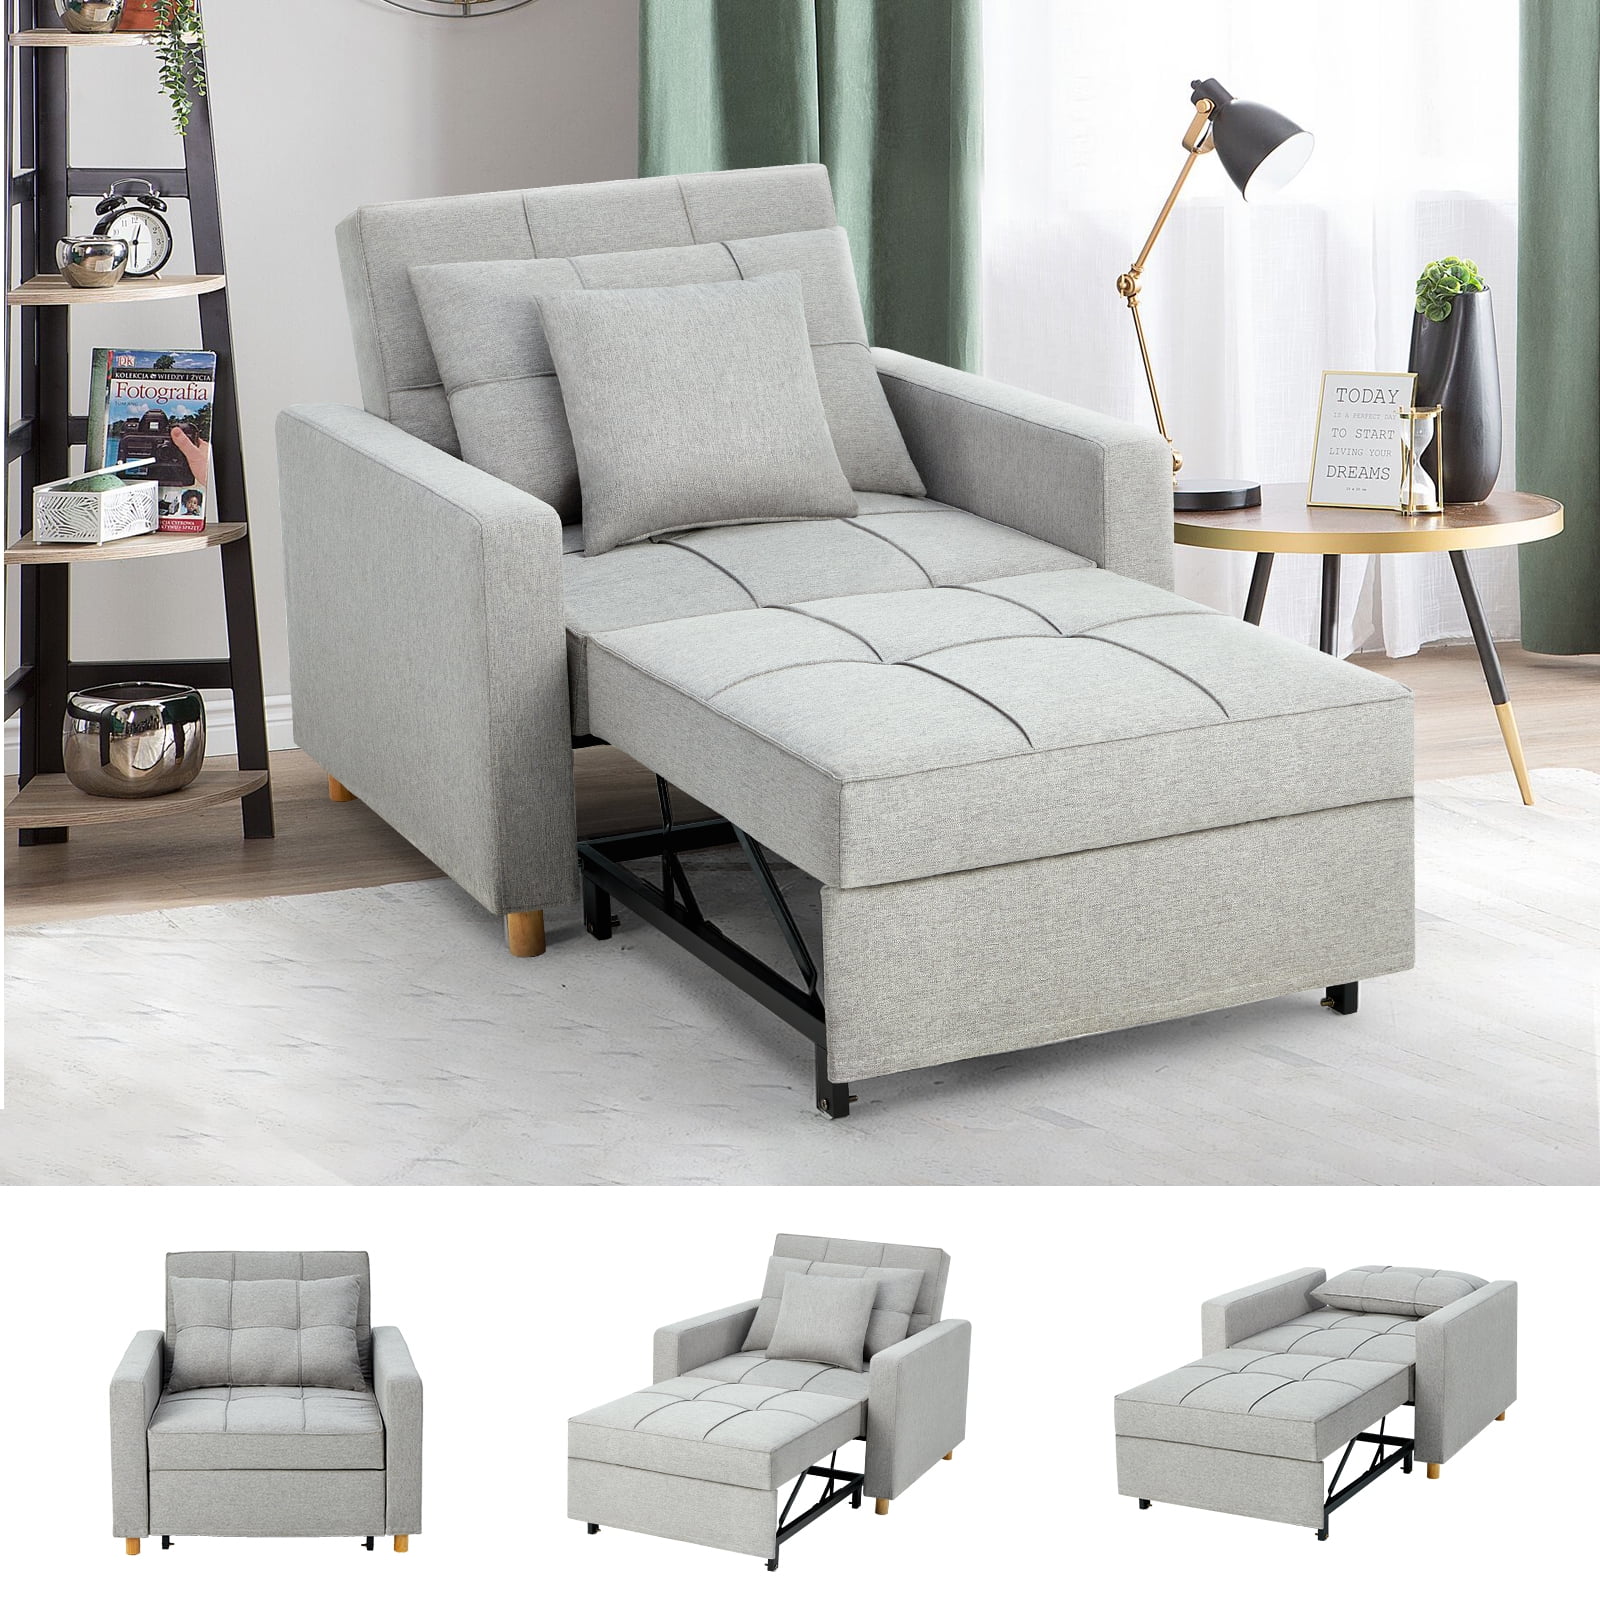 Yodolla 3 In 1 Futon Sofa Bed Chair, Single Convertible Chair Bed